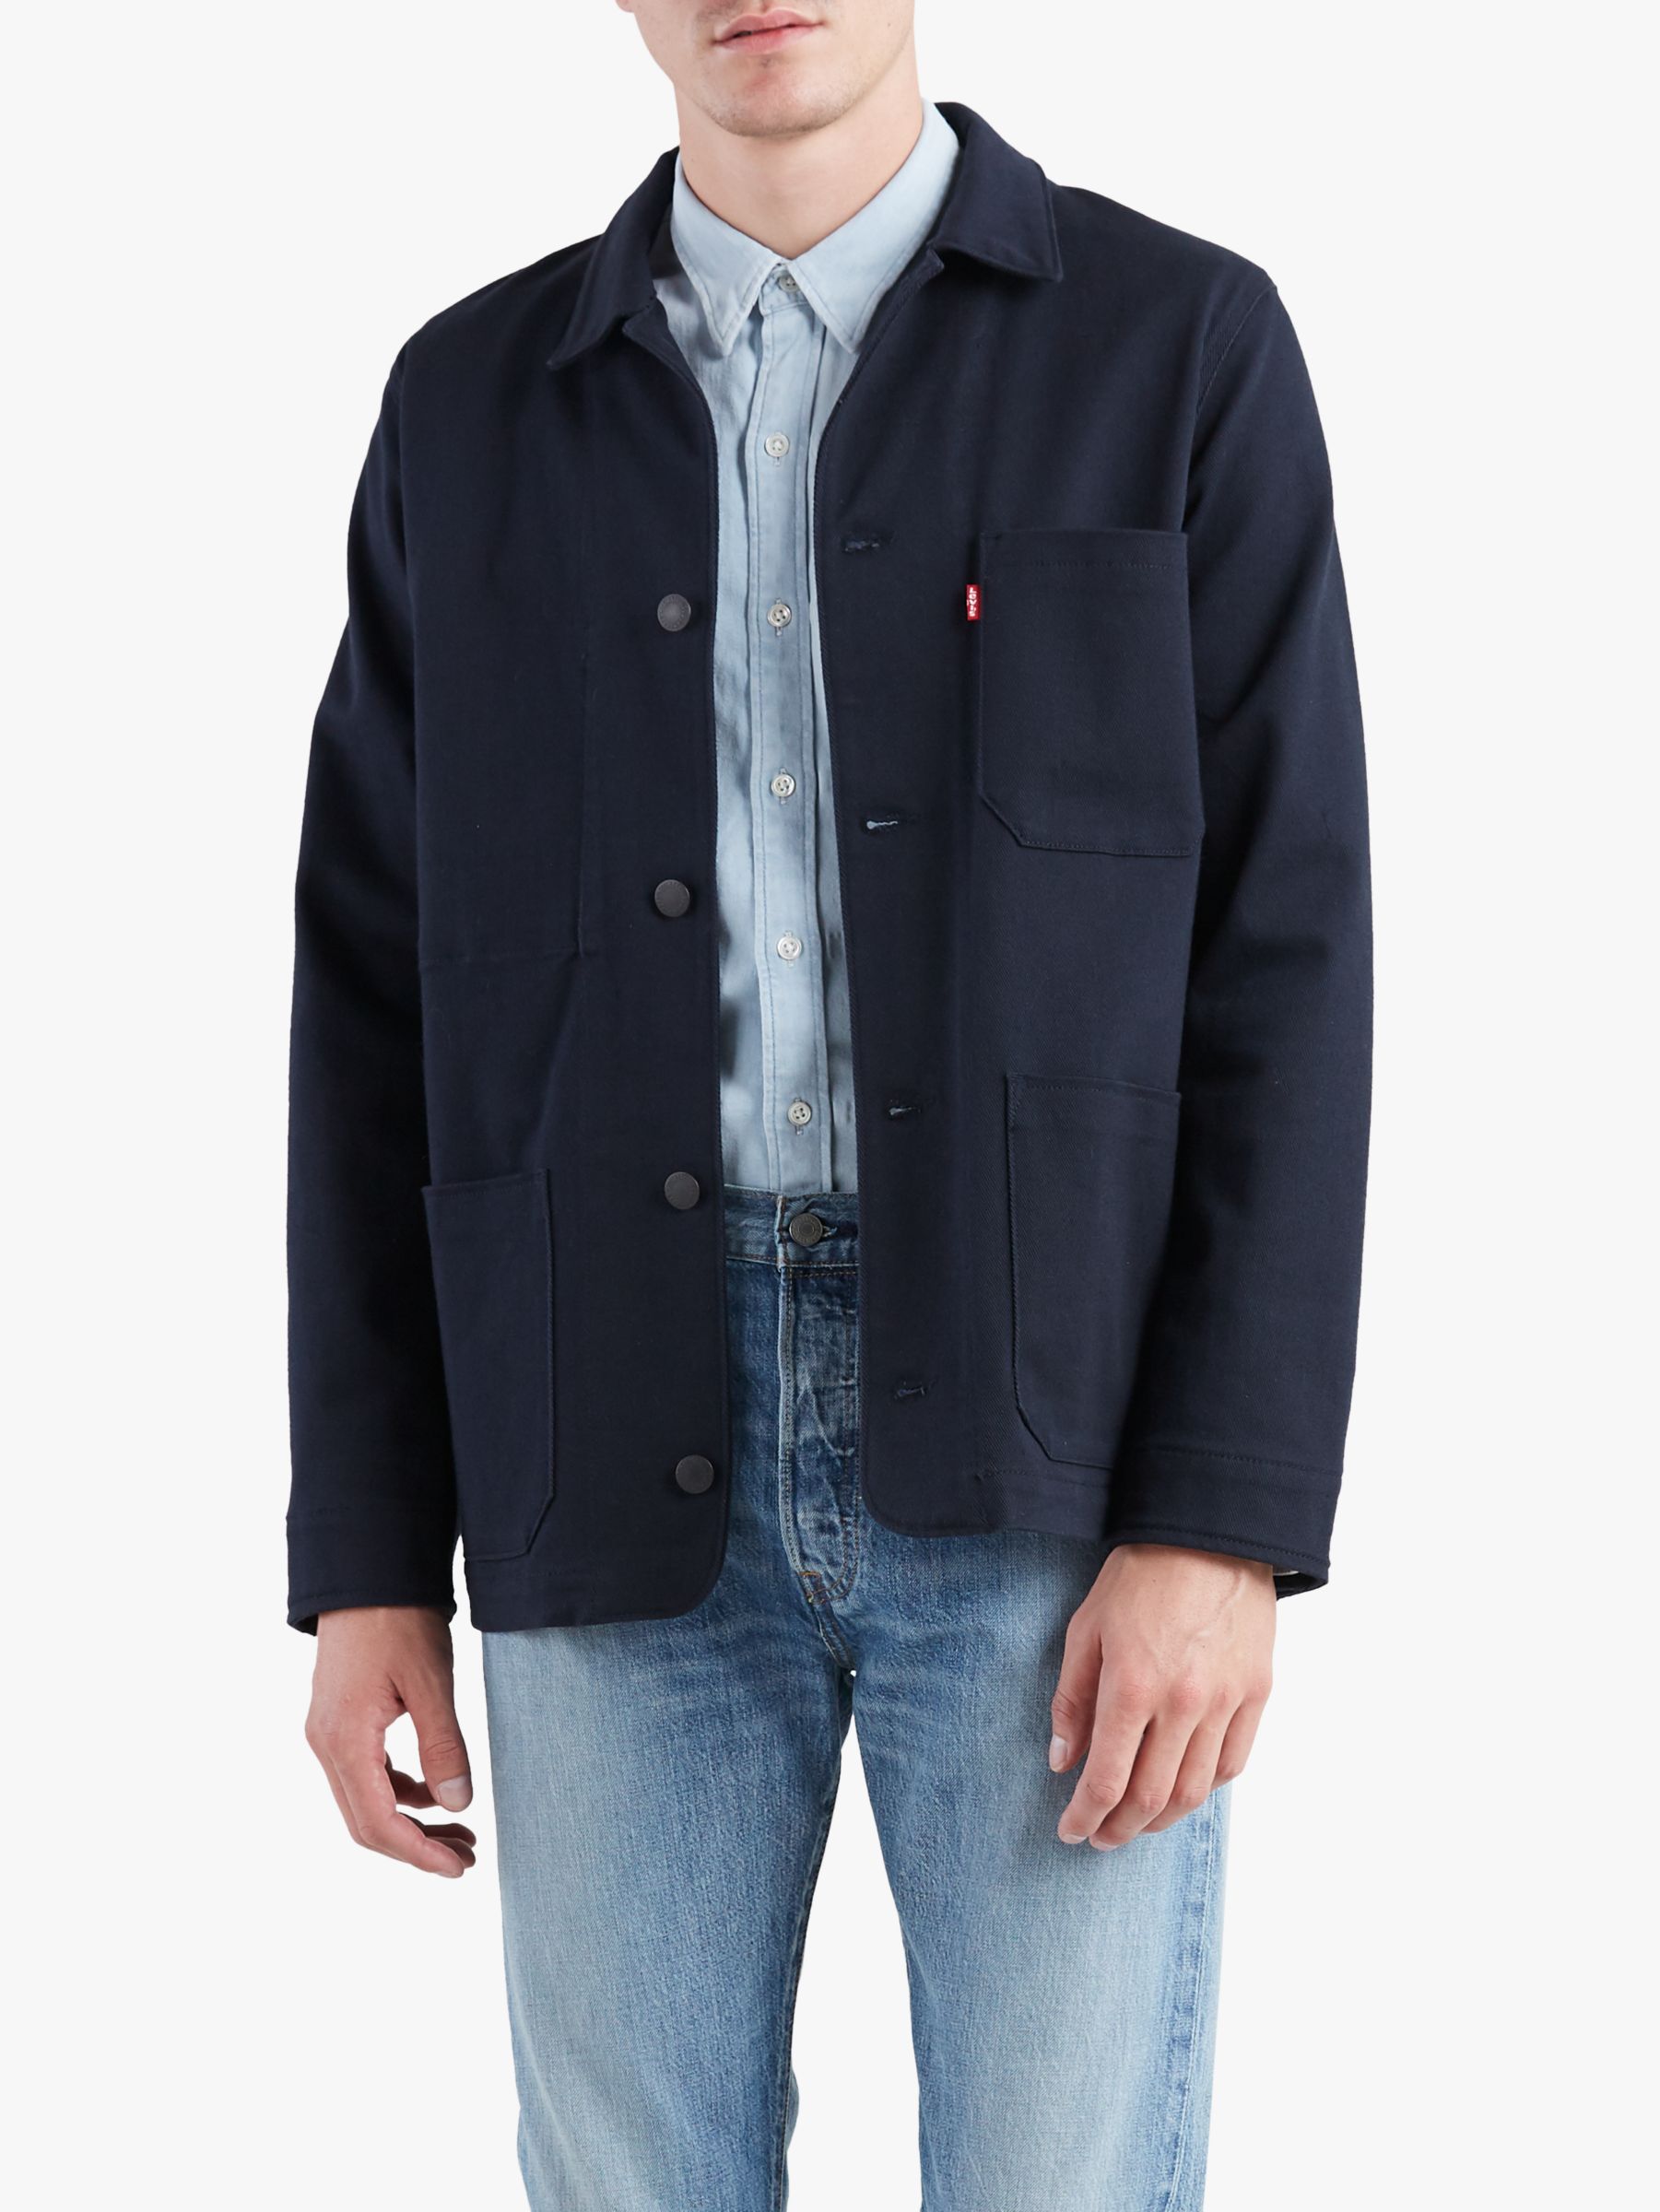 Levi's Engineers Coat, Sky Captain at 